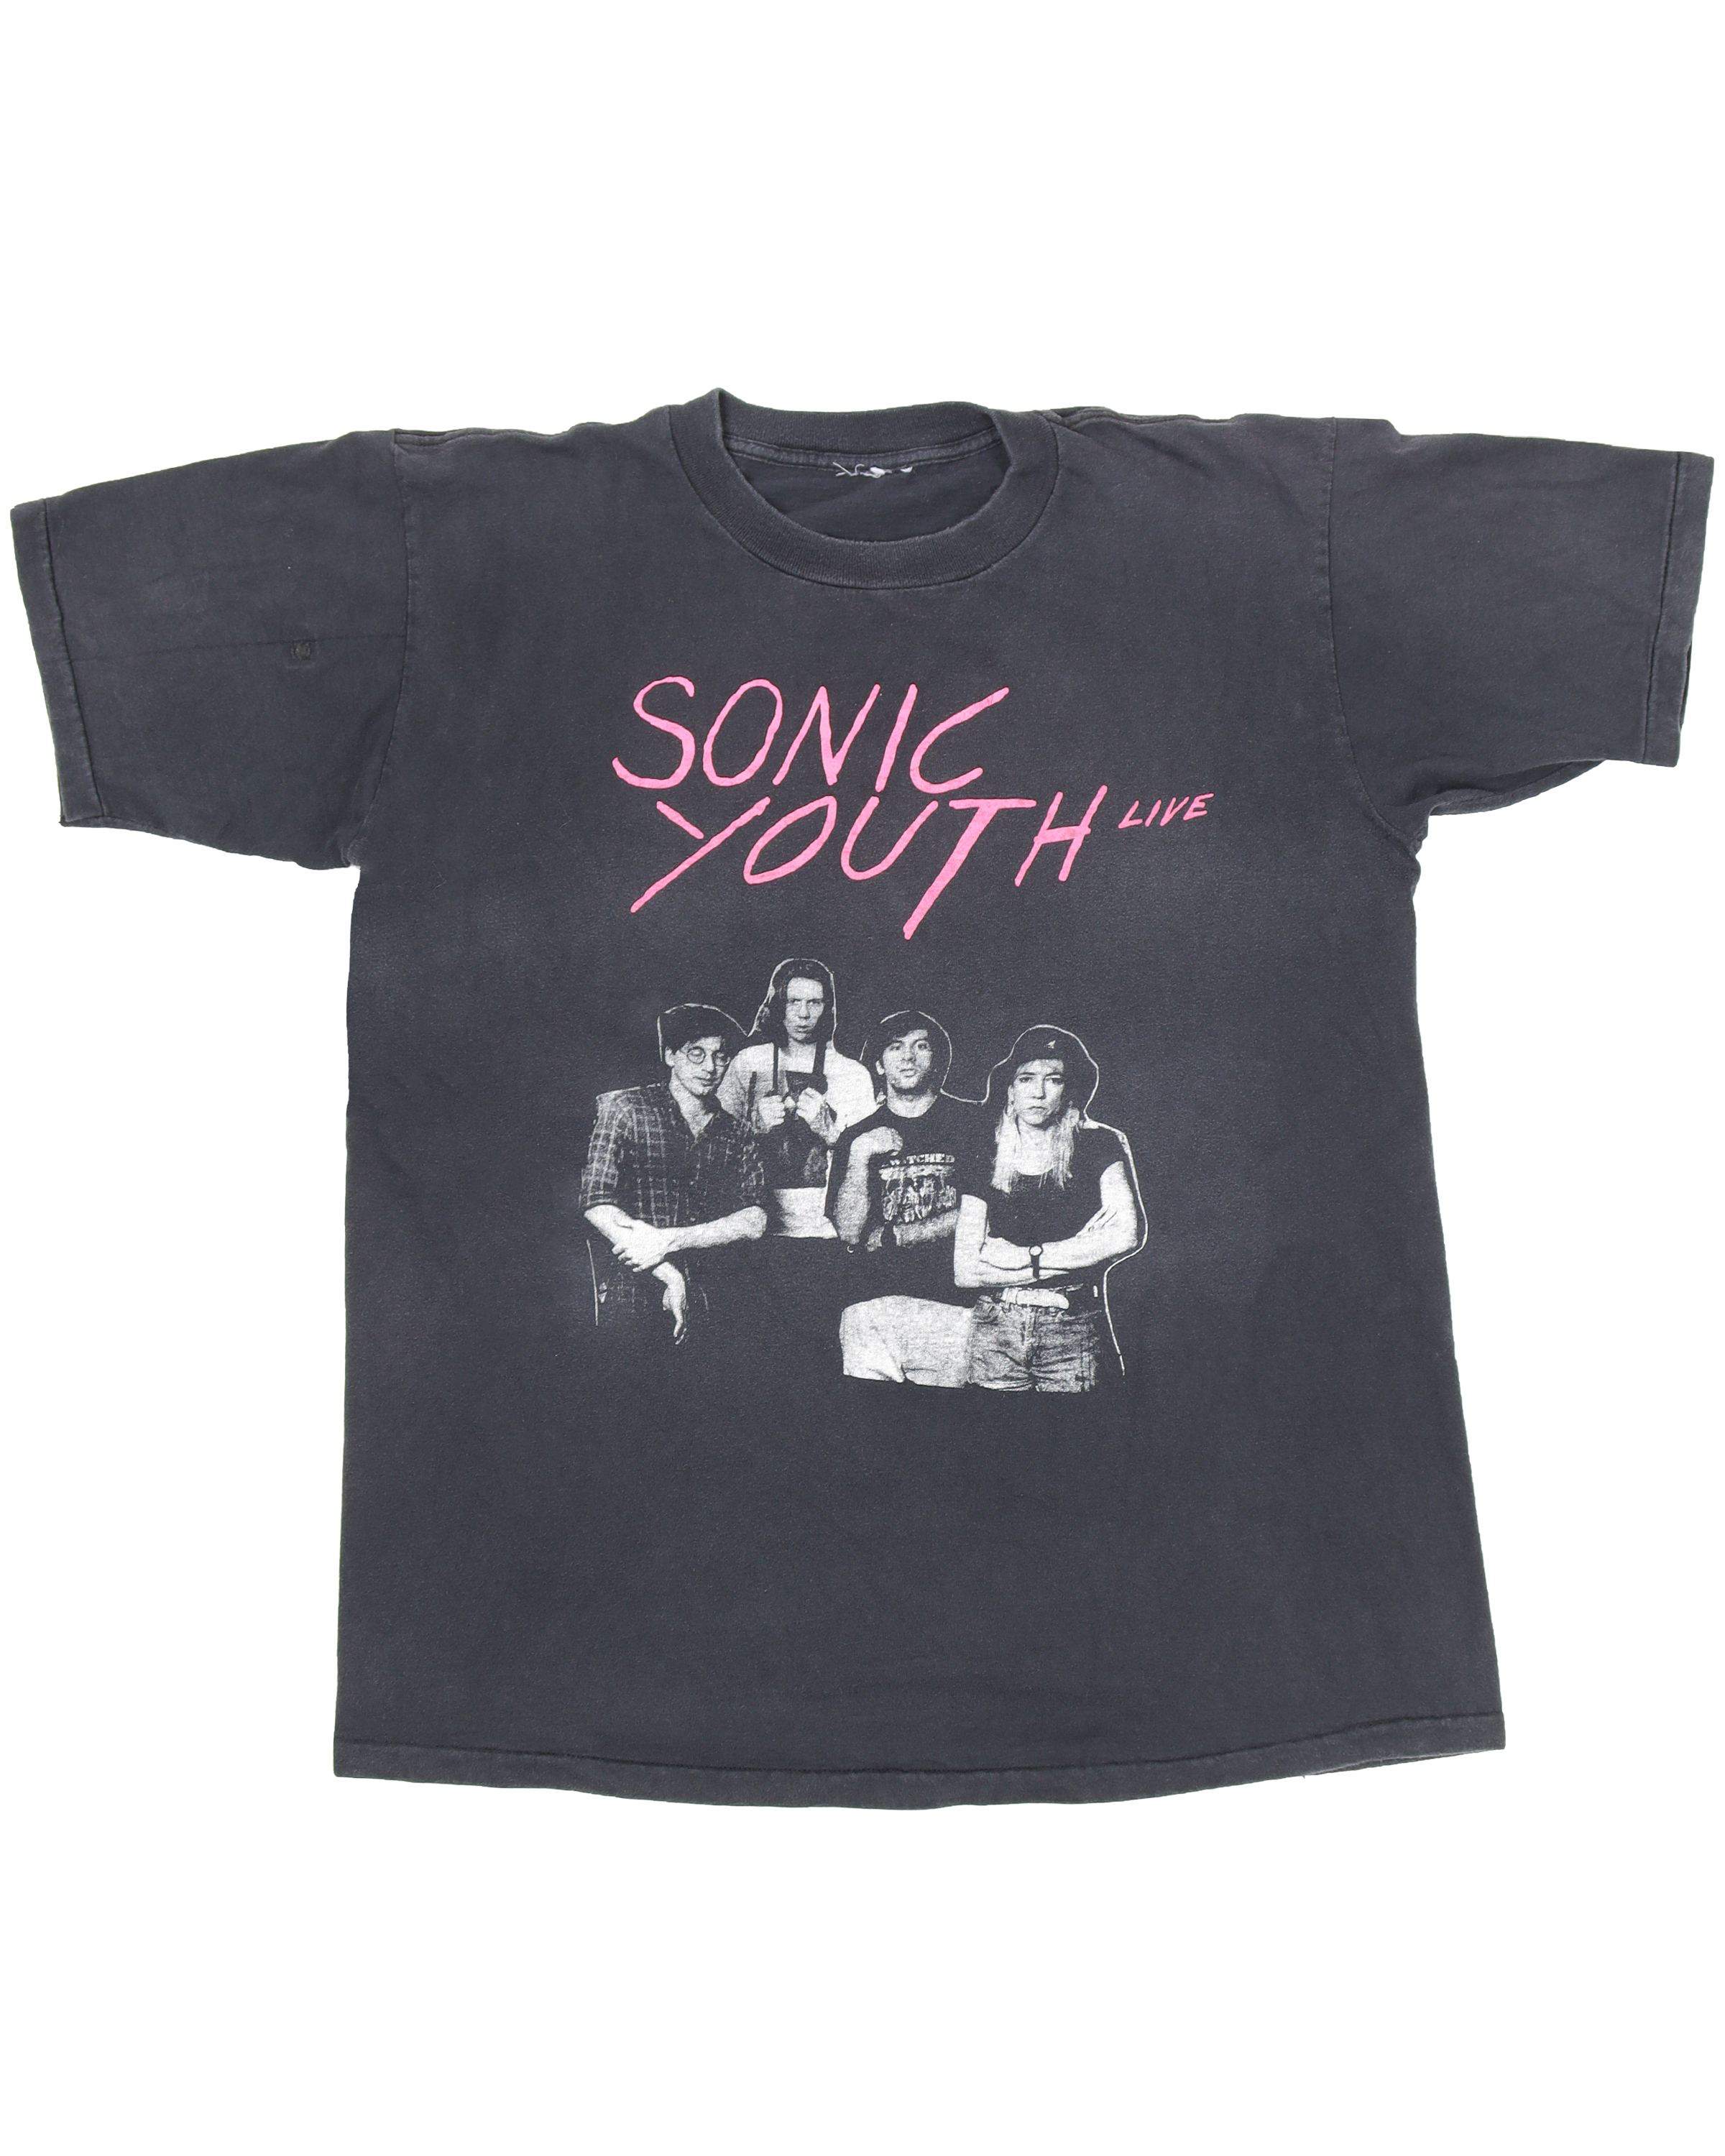 Sonic Youth Live T-Shirt